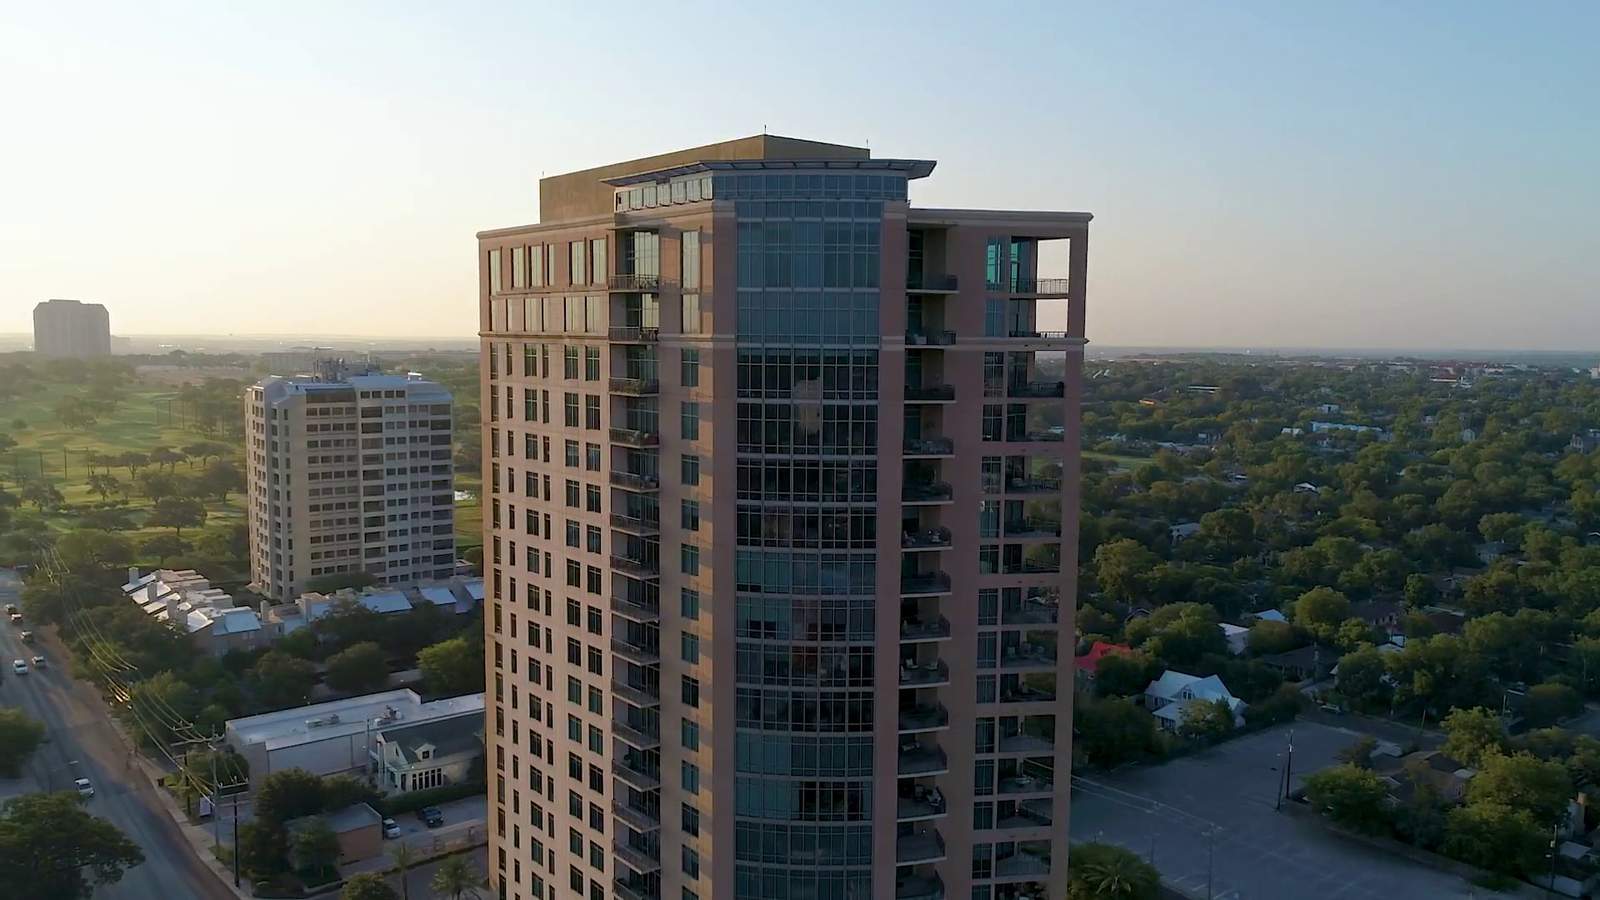 This is what the inside of a million-dollar San Antonio condo looks like